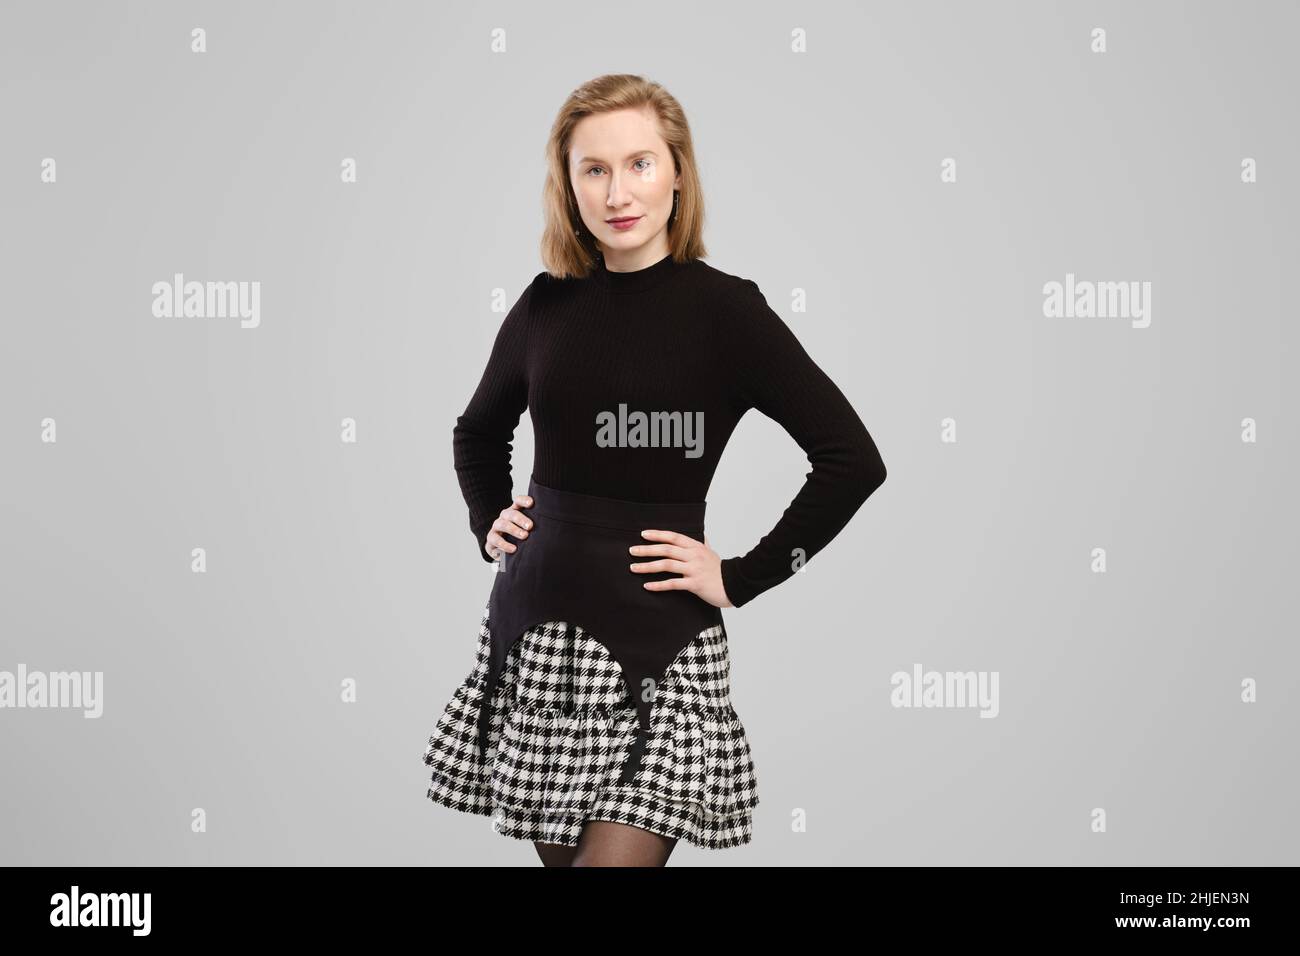 Young woman in turtleneck and suspender belt over little skirt posing in studio over grey background Stock Photo